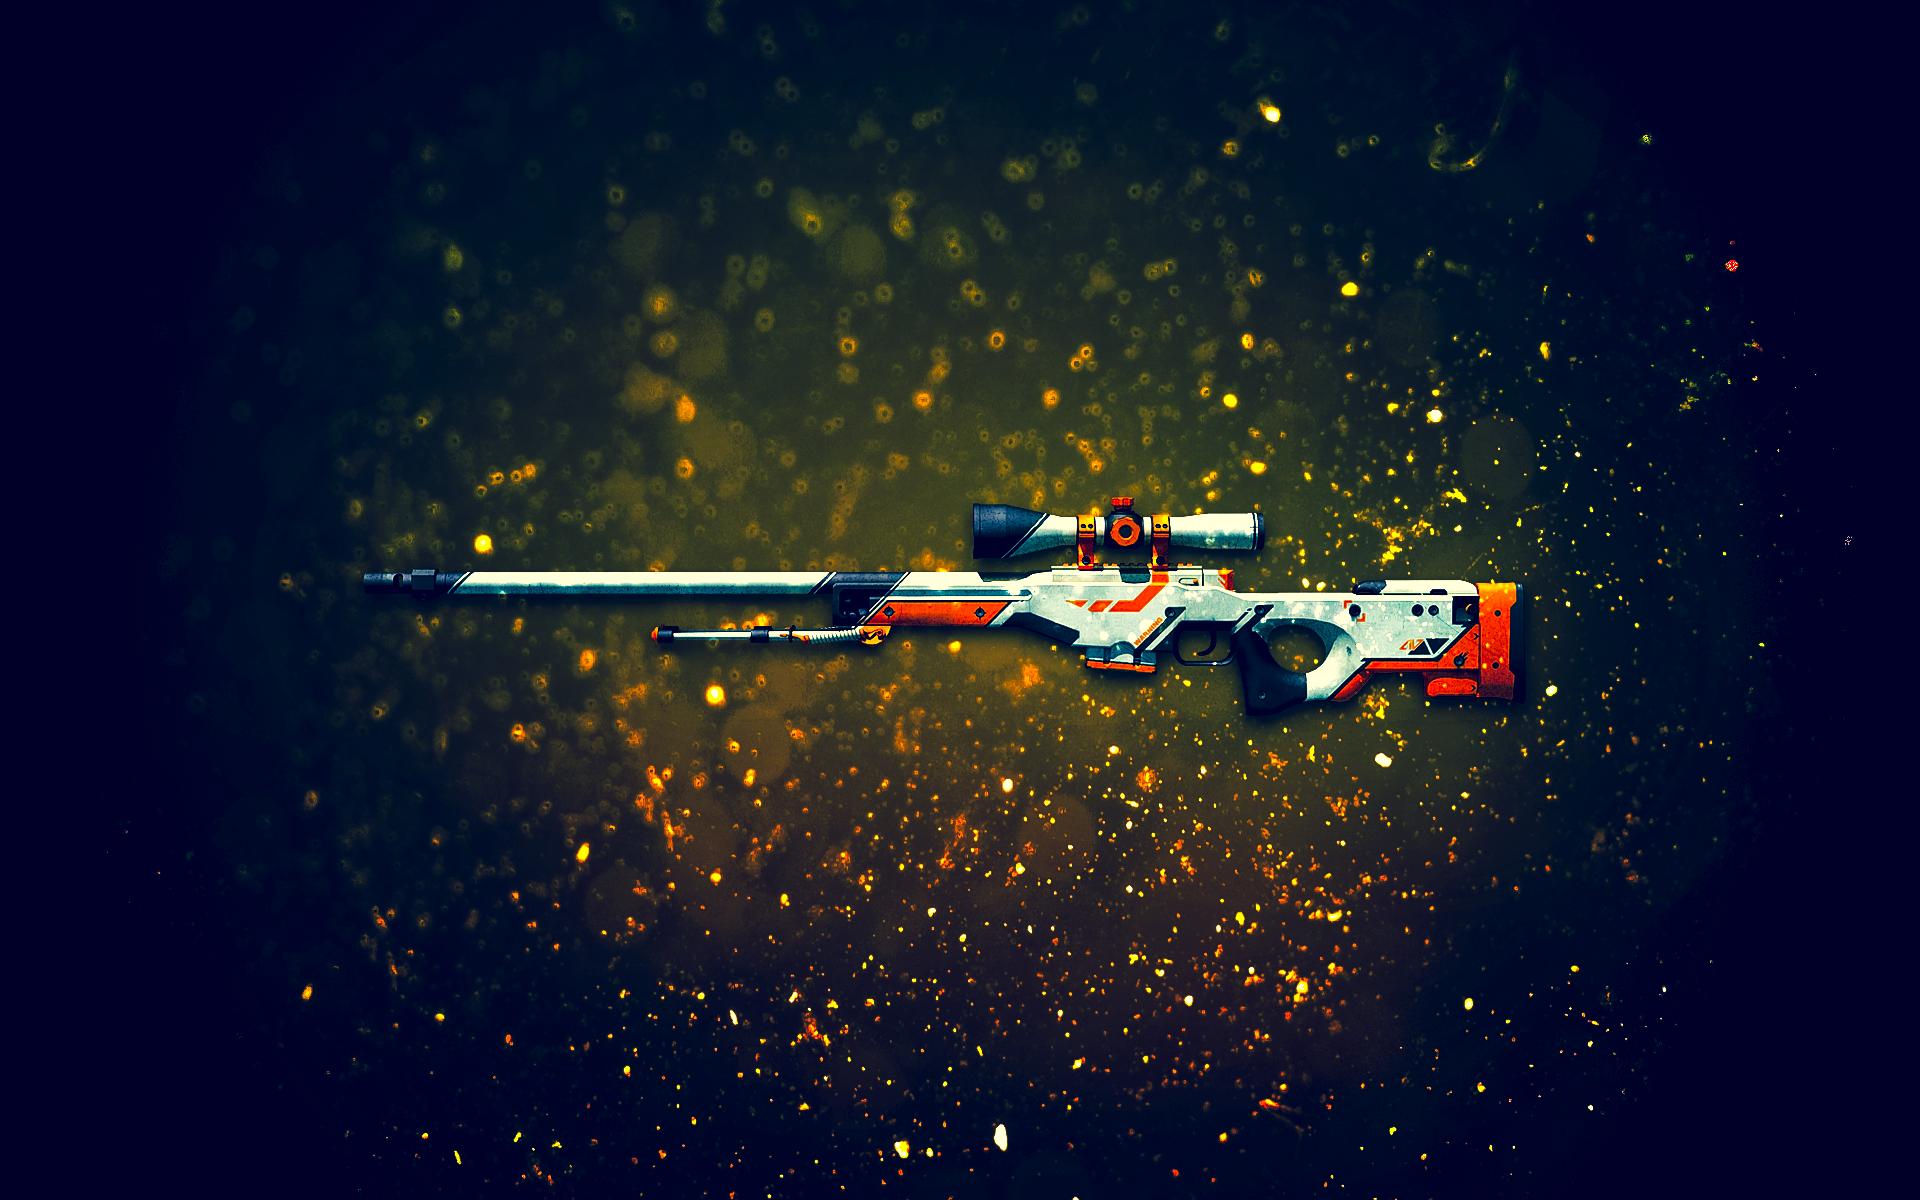 video game, counter strike: global offensive, awp (counter strike), counter strike High Definition image